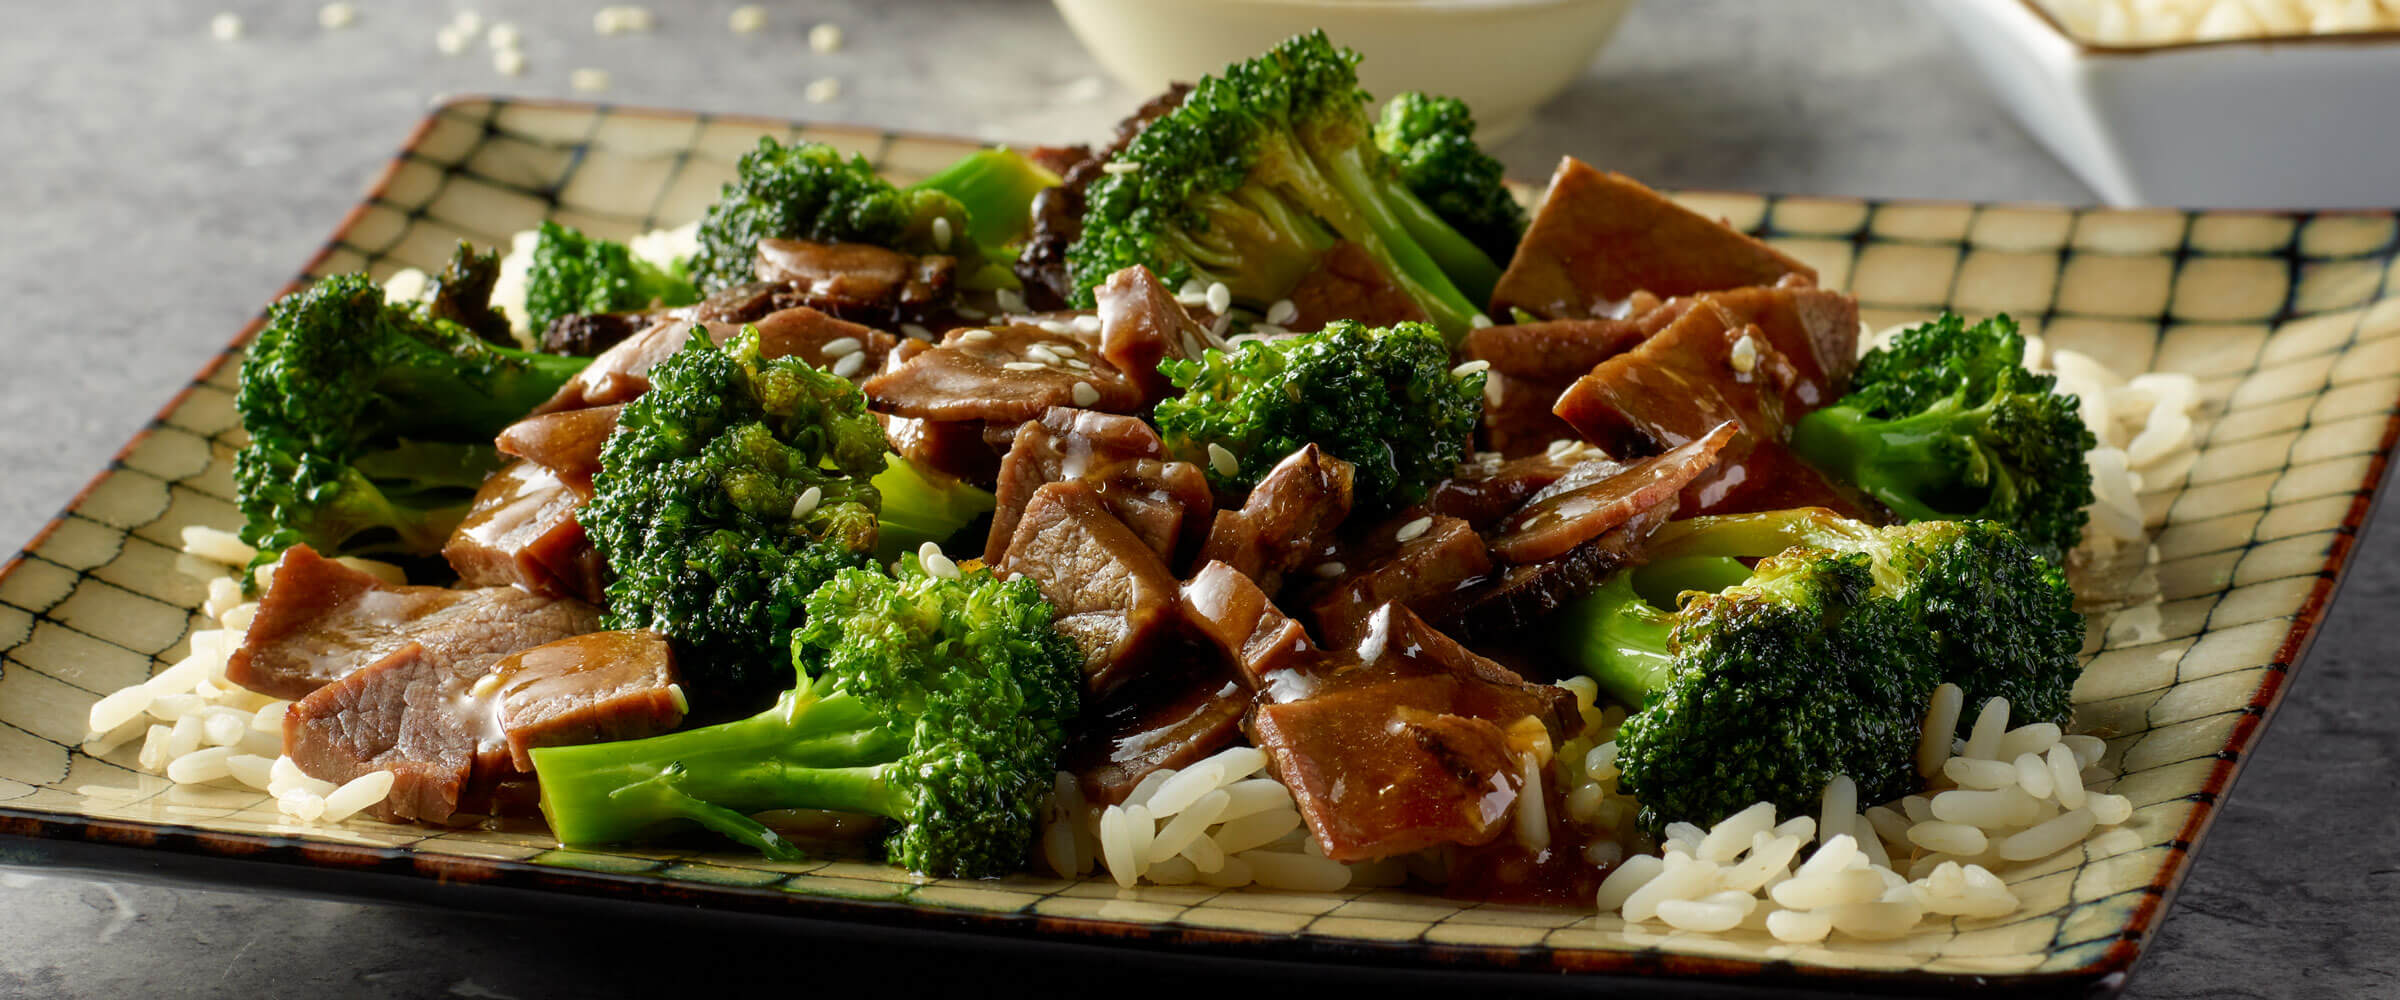 Roast Beef and Broccoli Stir-fry on plate with rice